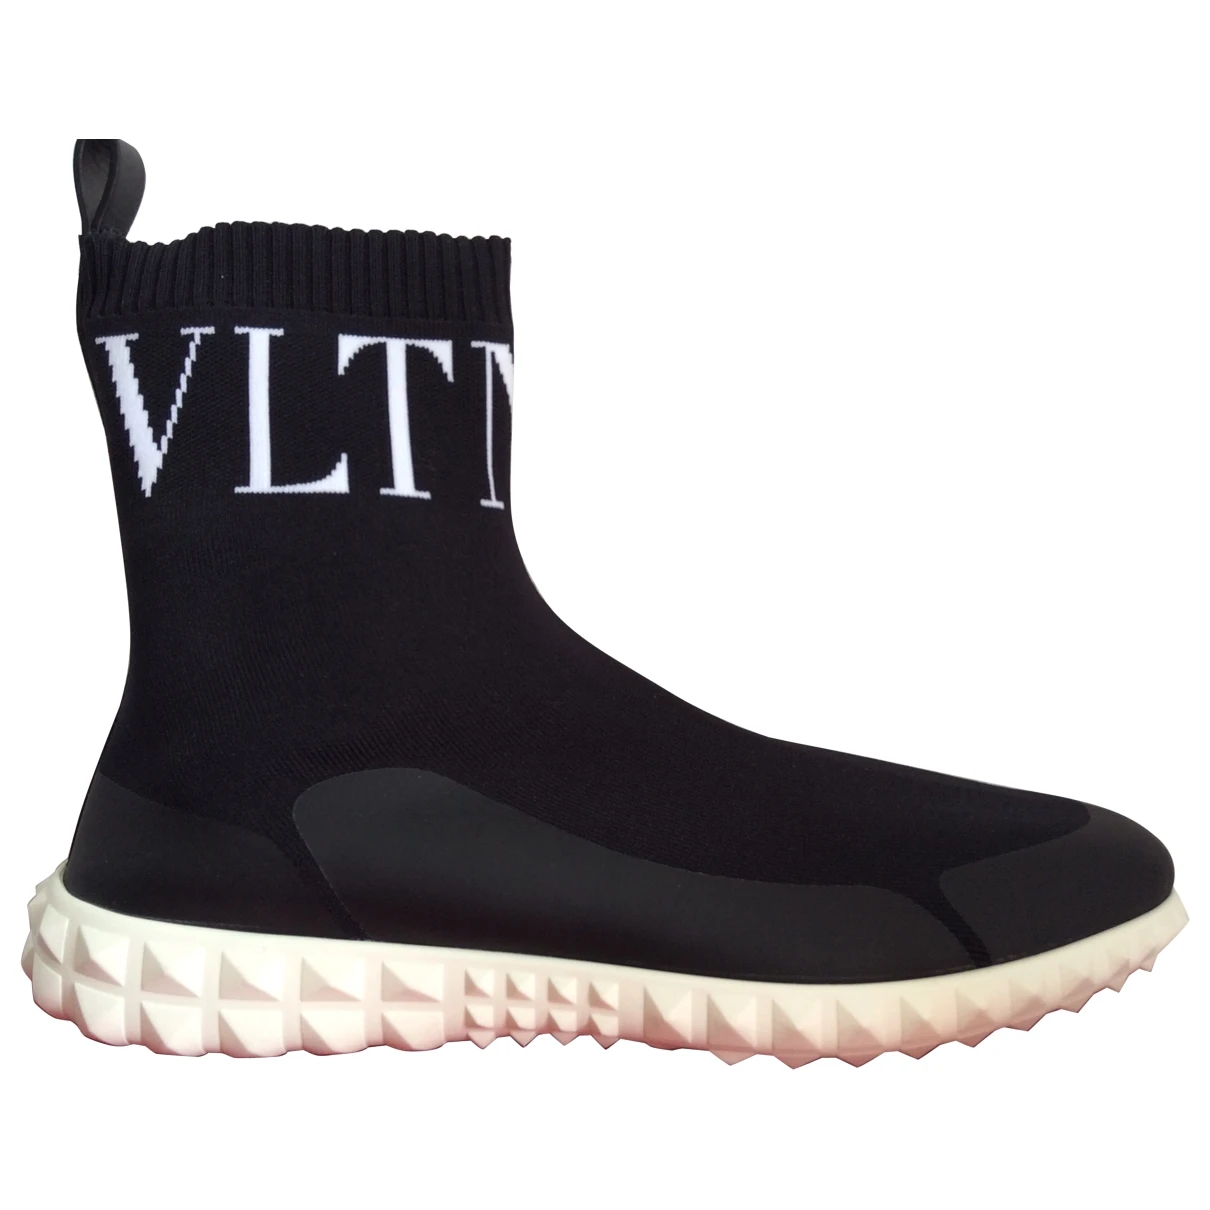 shoes Valentino Garavani trainers Sneakers chaussettes Vltn for Female Cloth 40 EU. Used condition